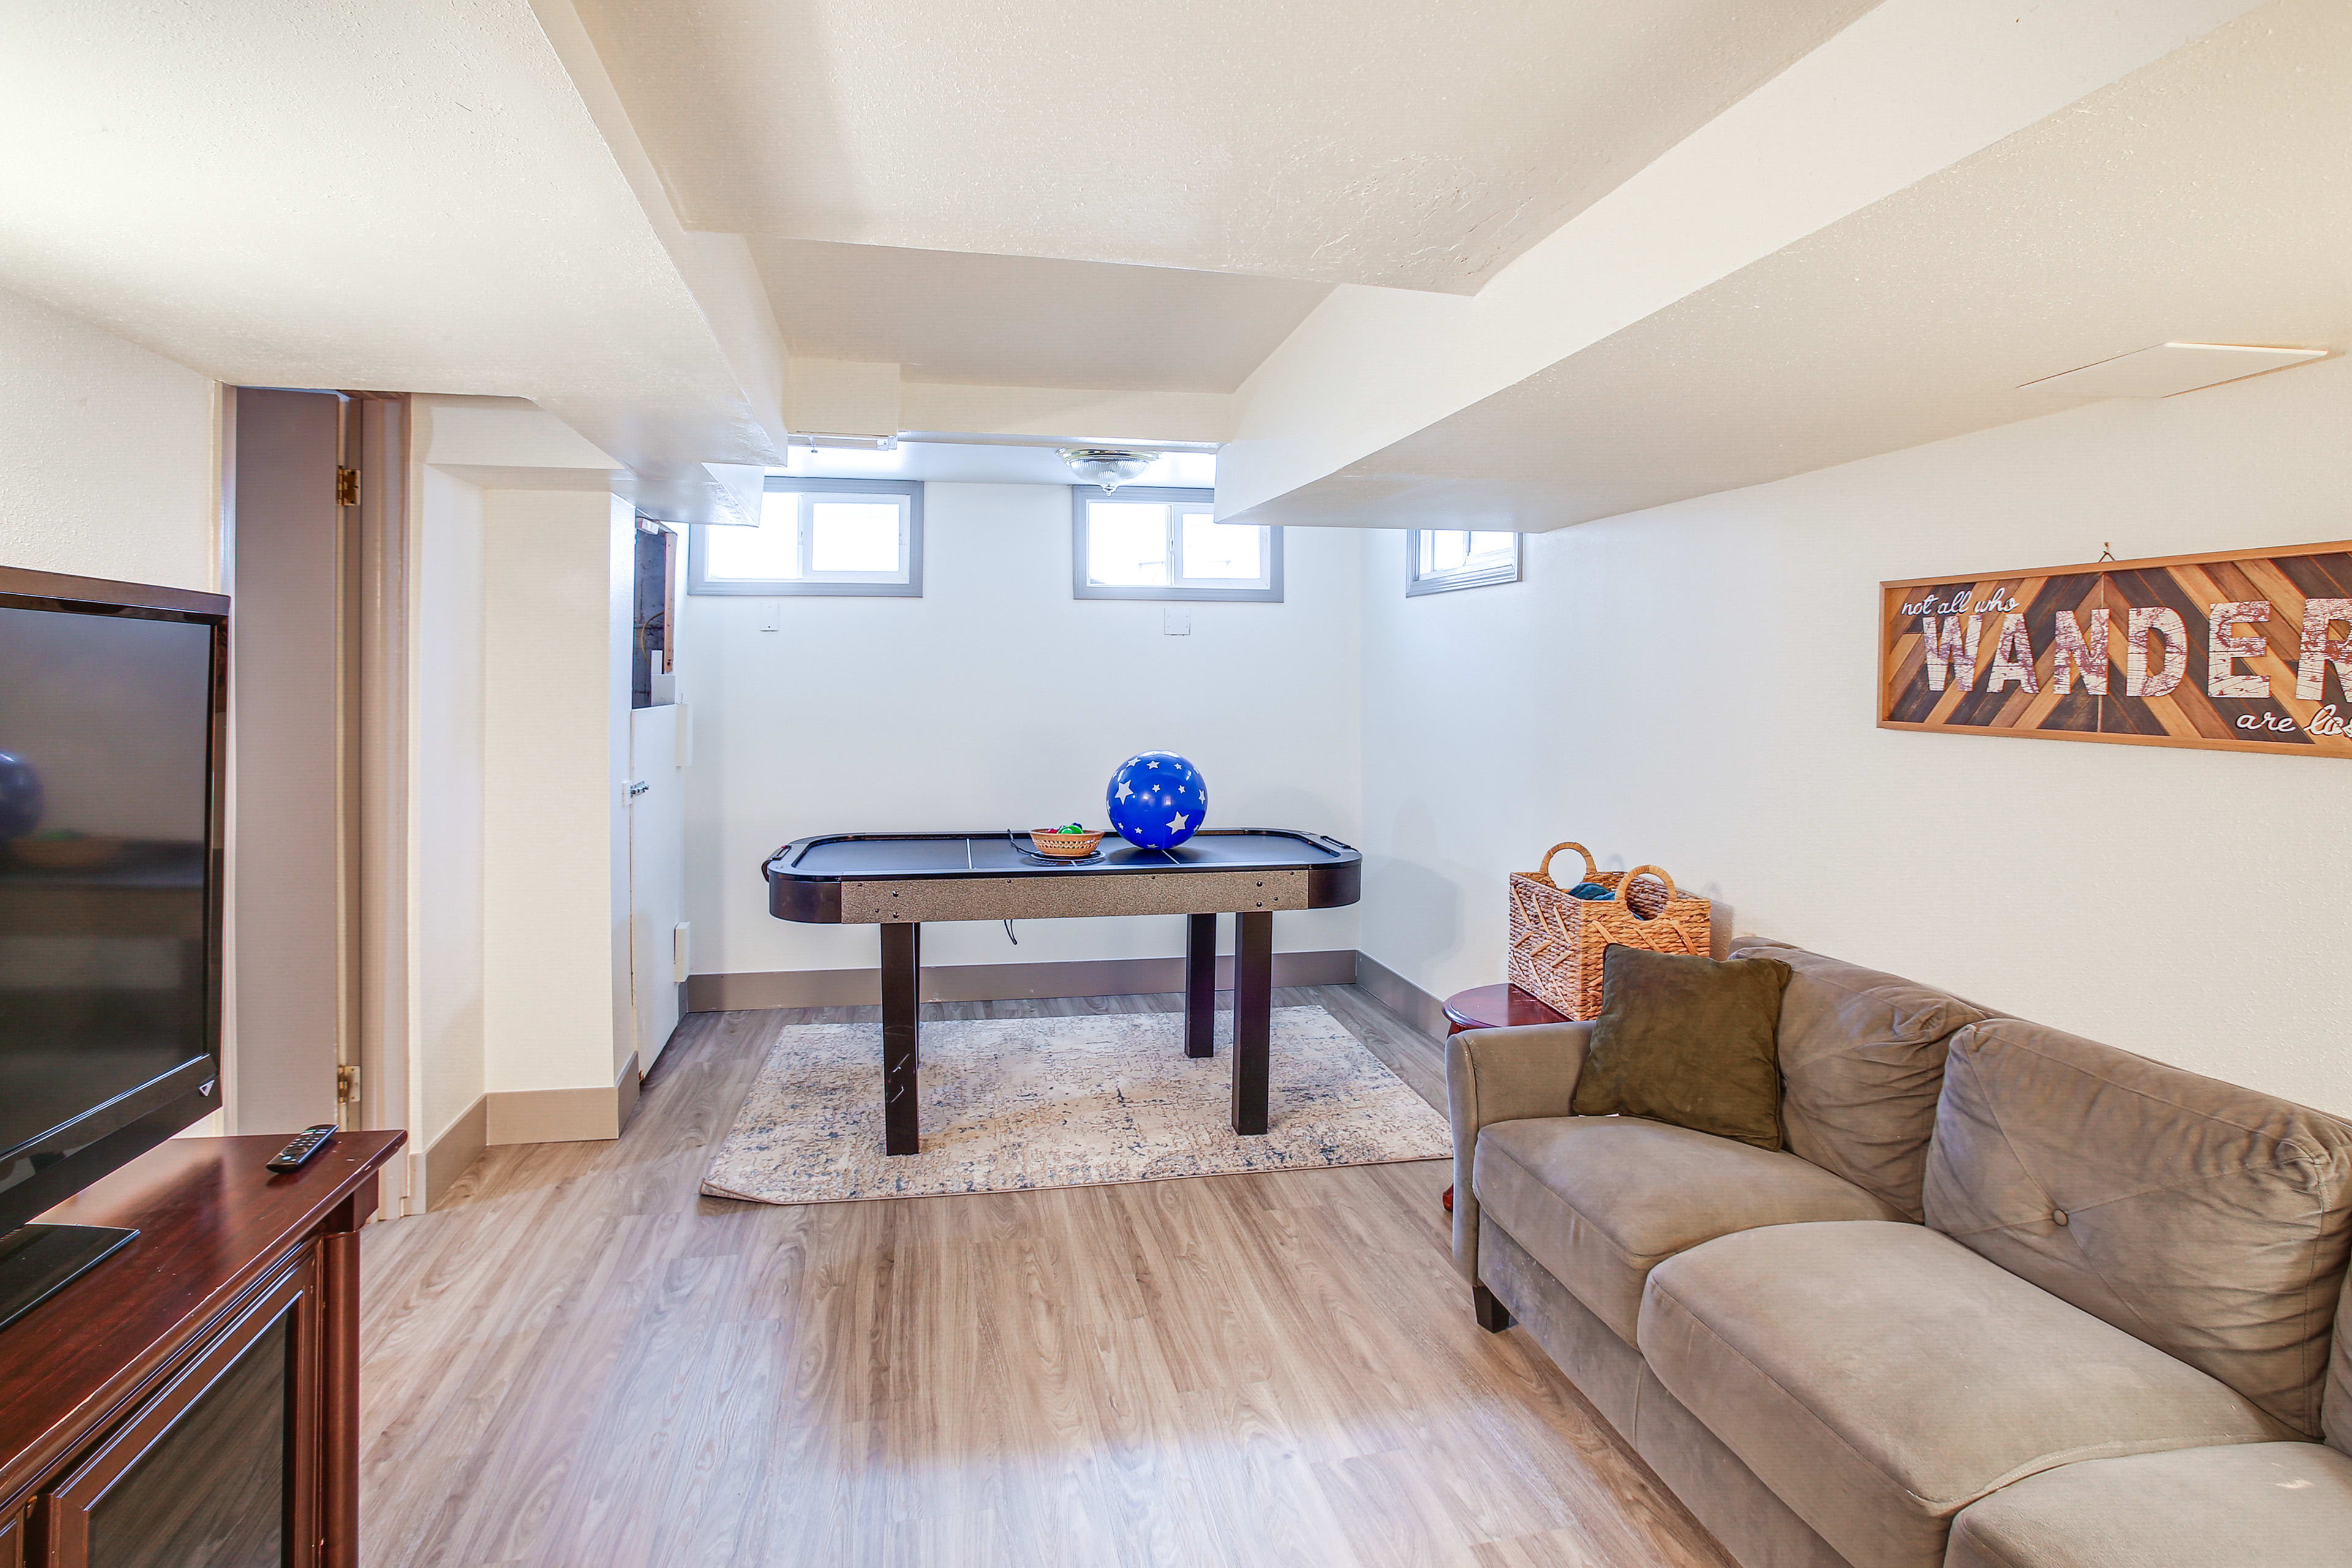 Game Room | Air Hockey Table | Smart TV w/ Cable | Basement